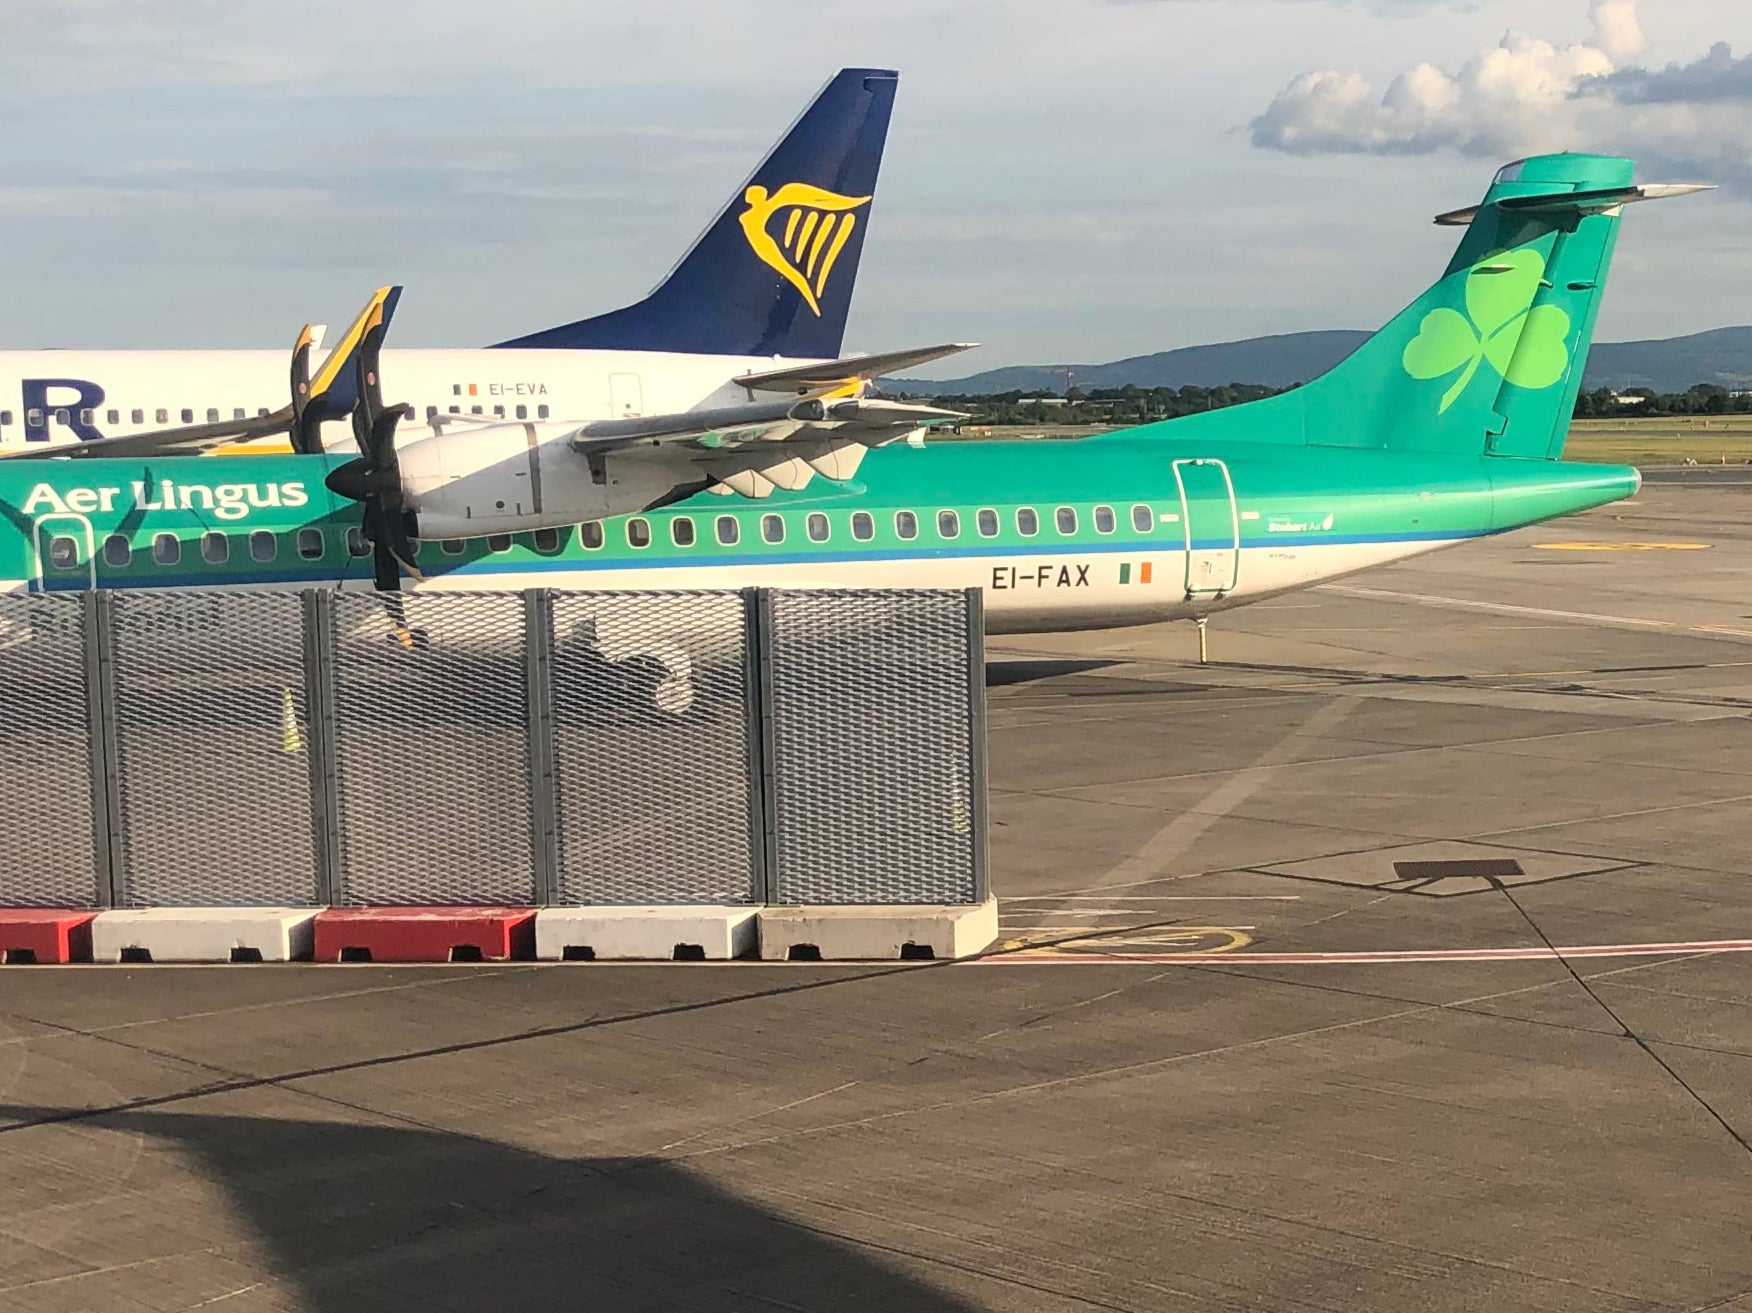 Big rivals: aircraft in the colours of Aer Lingus and Ryanair at Dublin airport